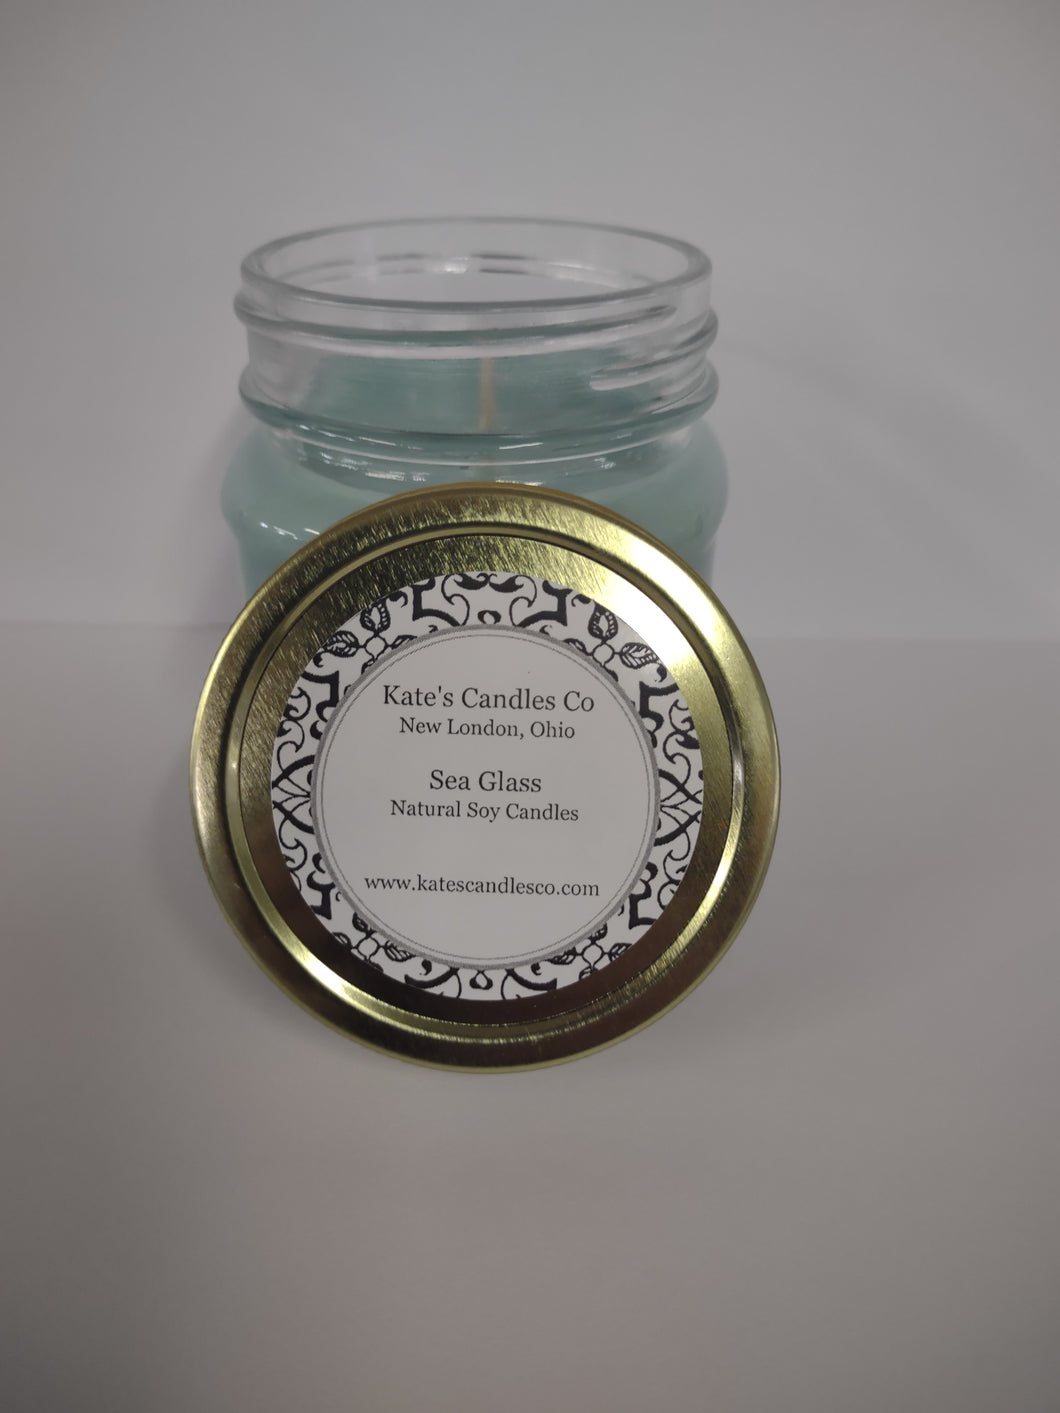 Sea Glass Soy Candles - Kate's Candles Co.